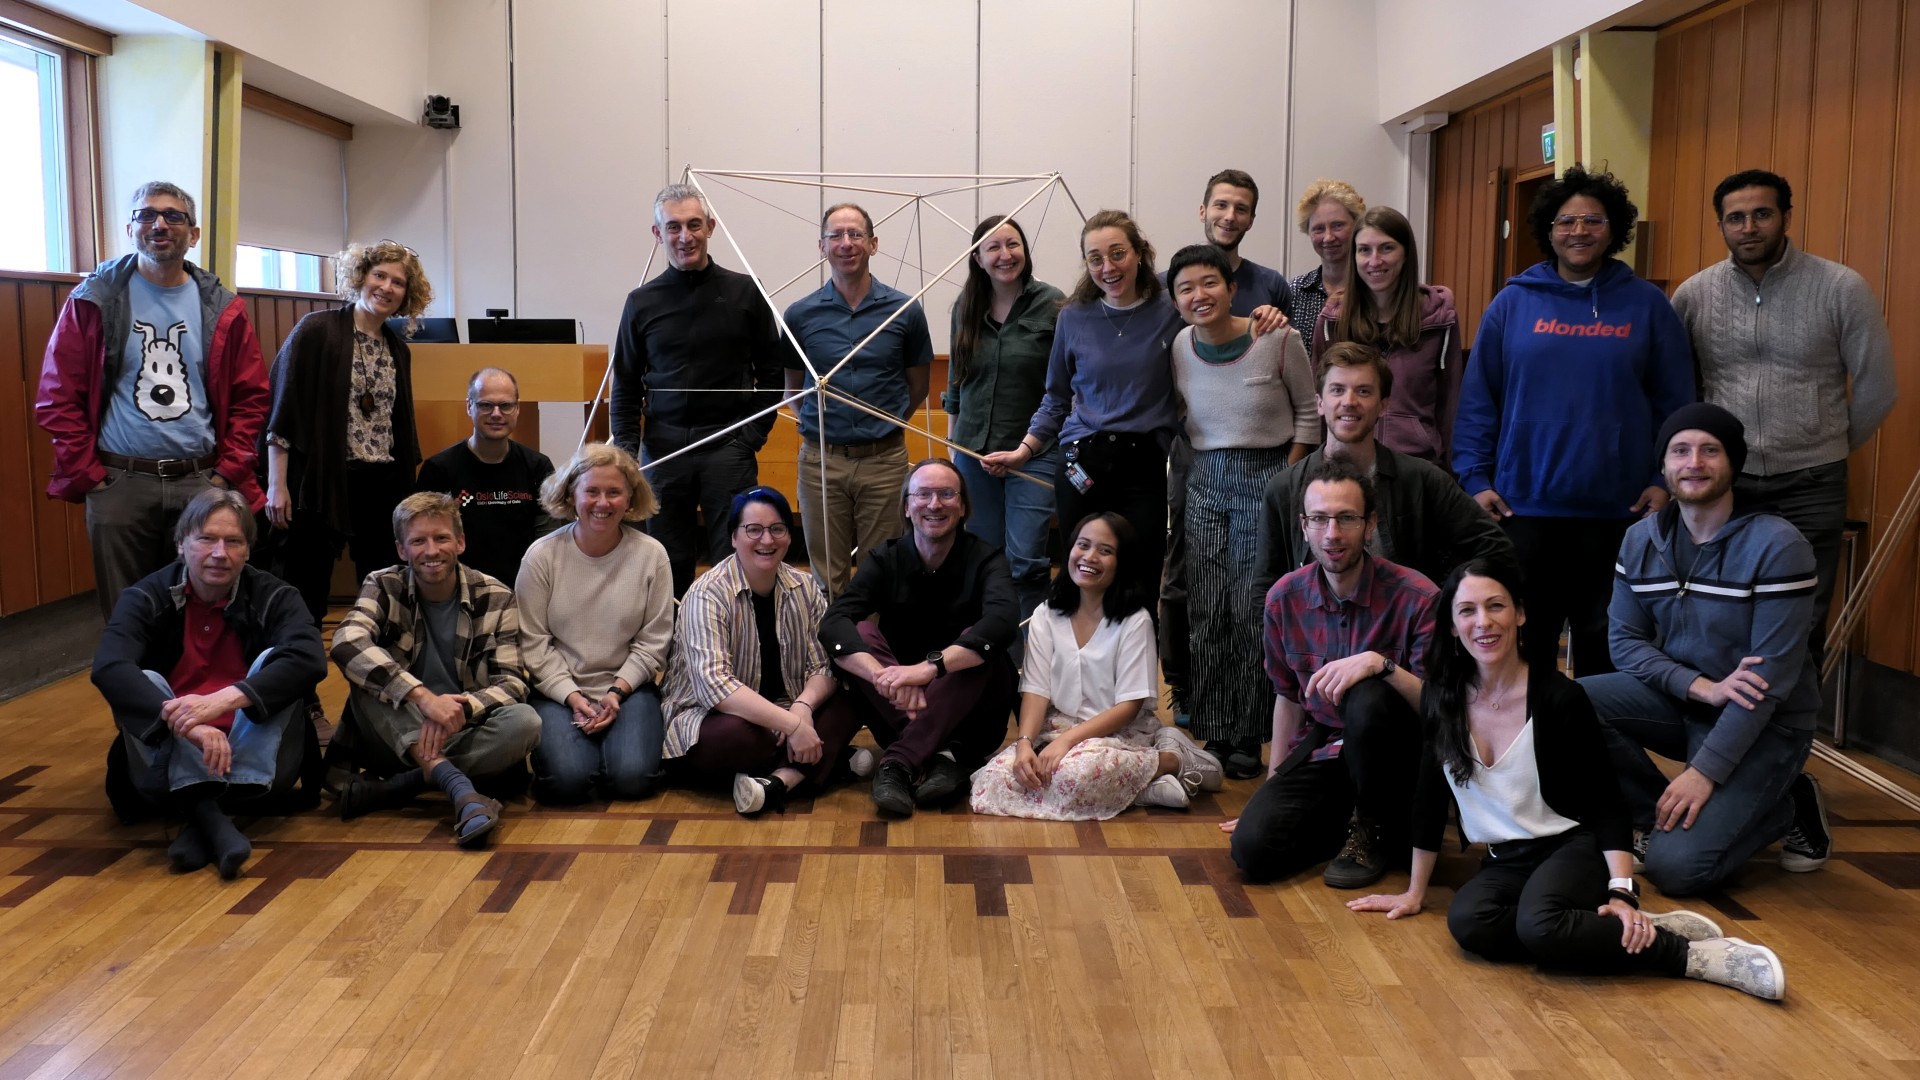 Some of the participants in the RITMO International Rhythm Rising Workshop, held in Oslo, 23-27 May 2022.